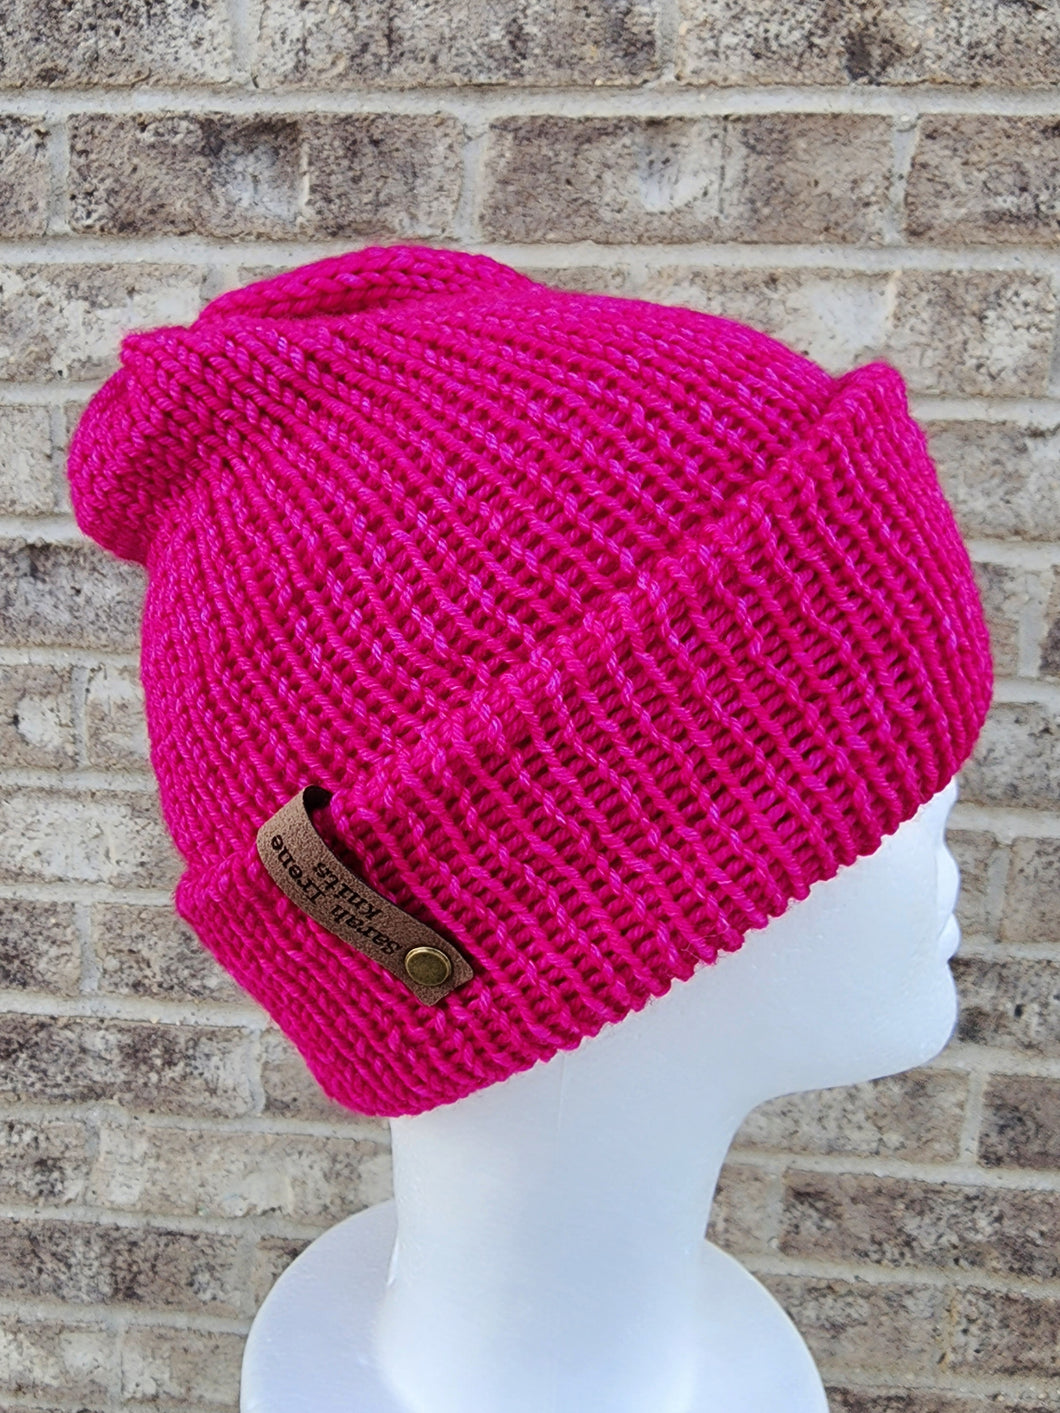 Double brim classic beanie in bright pink color. No pom.